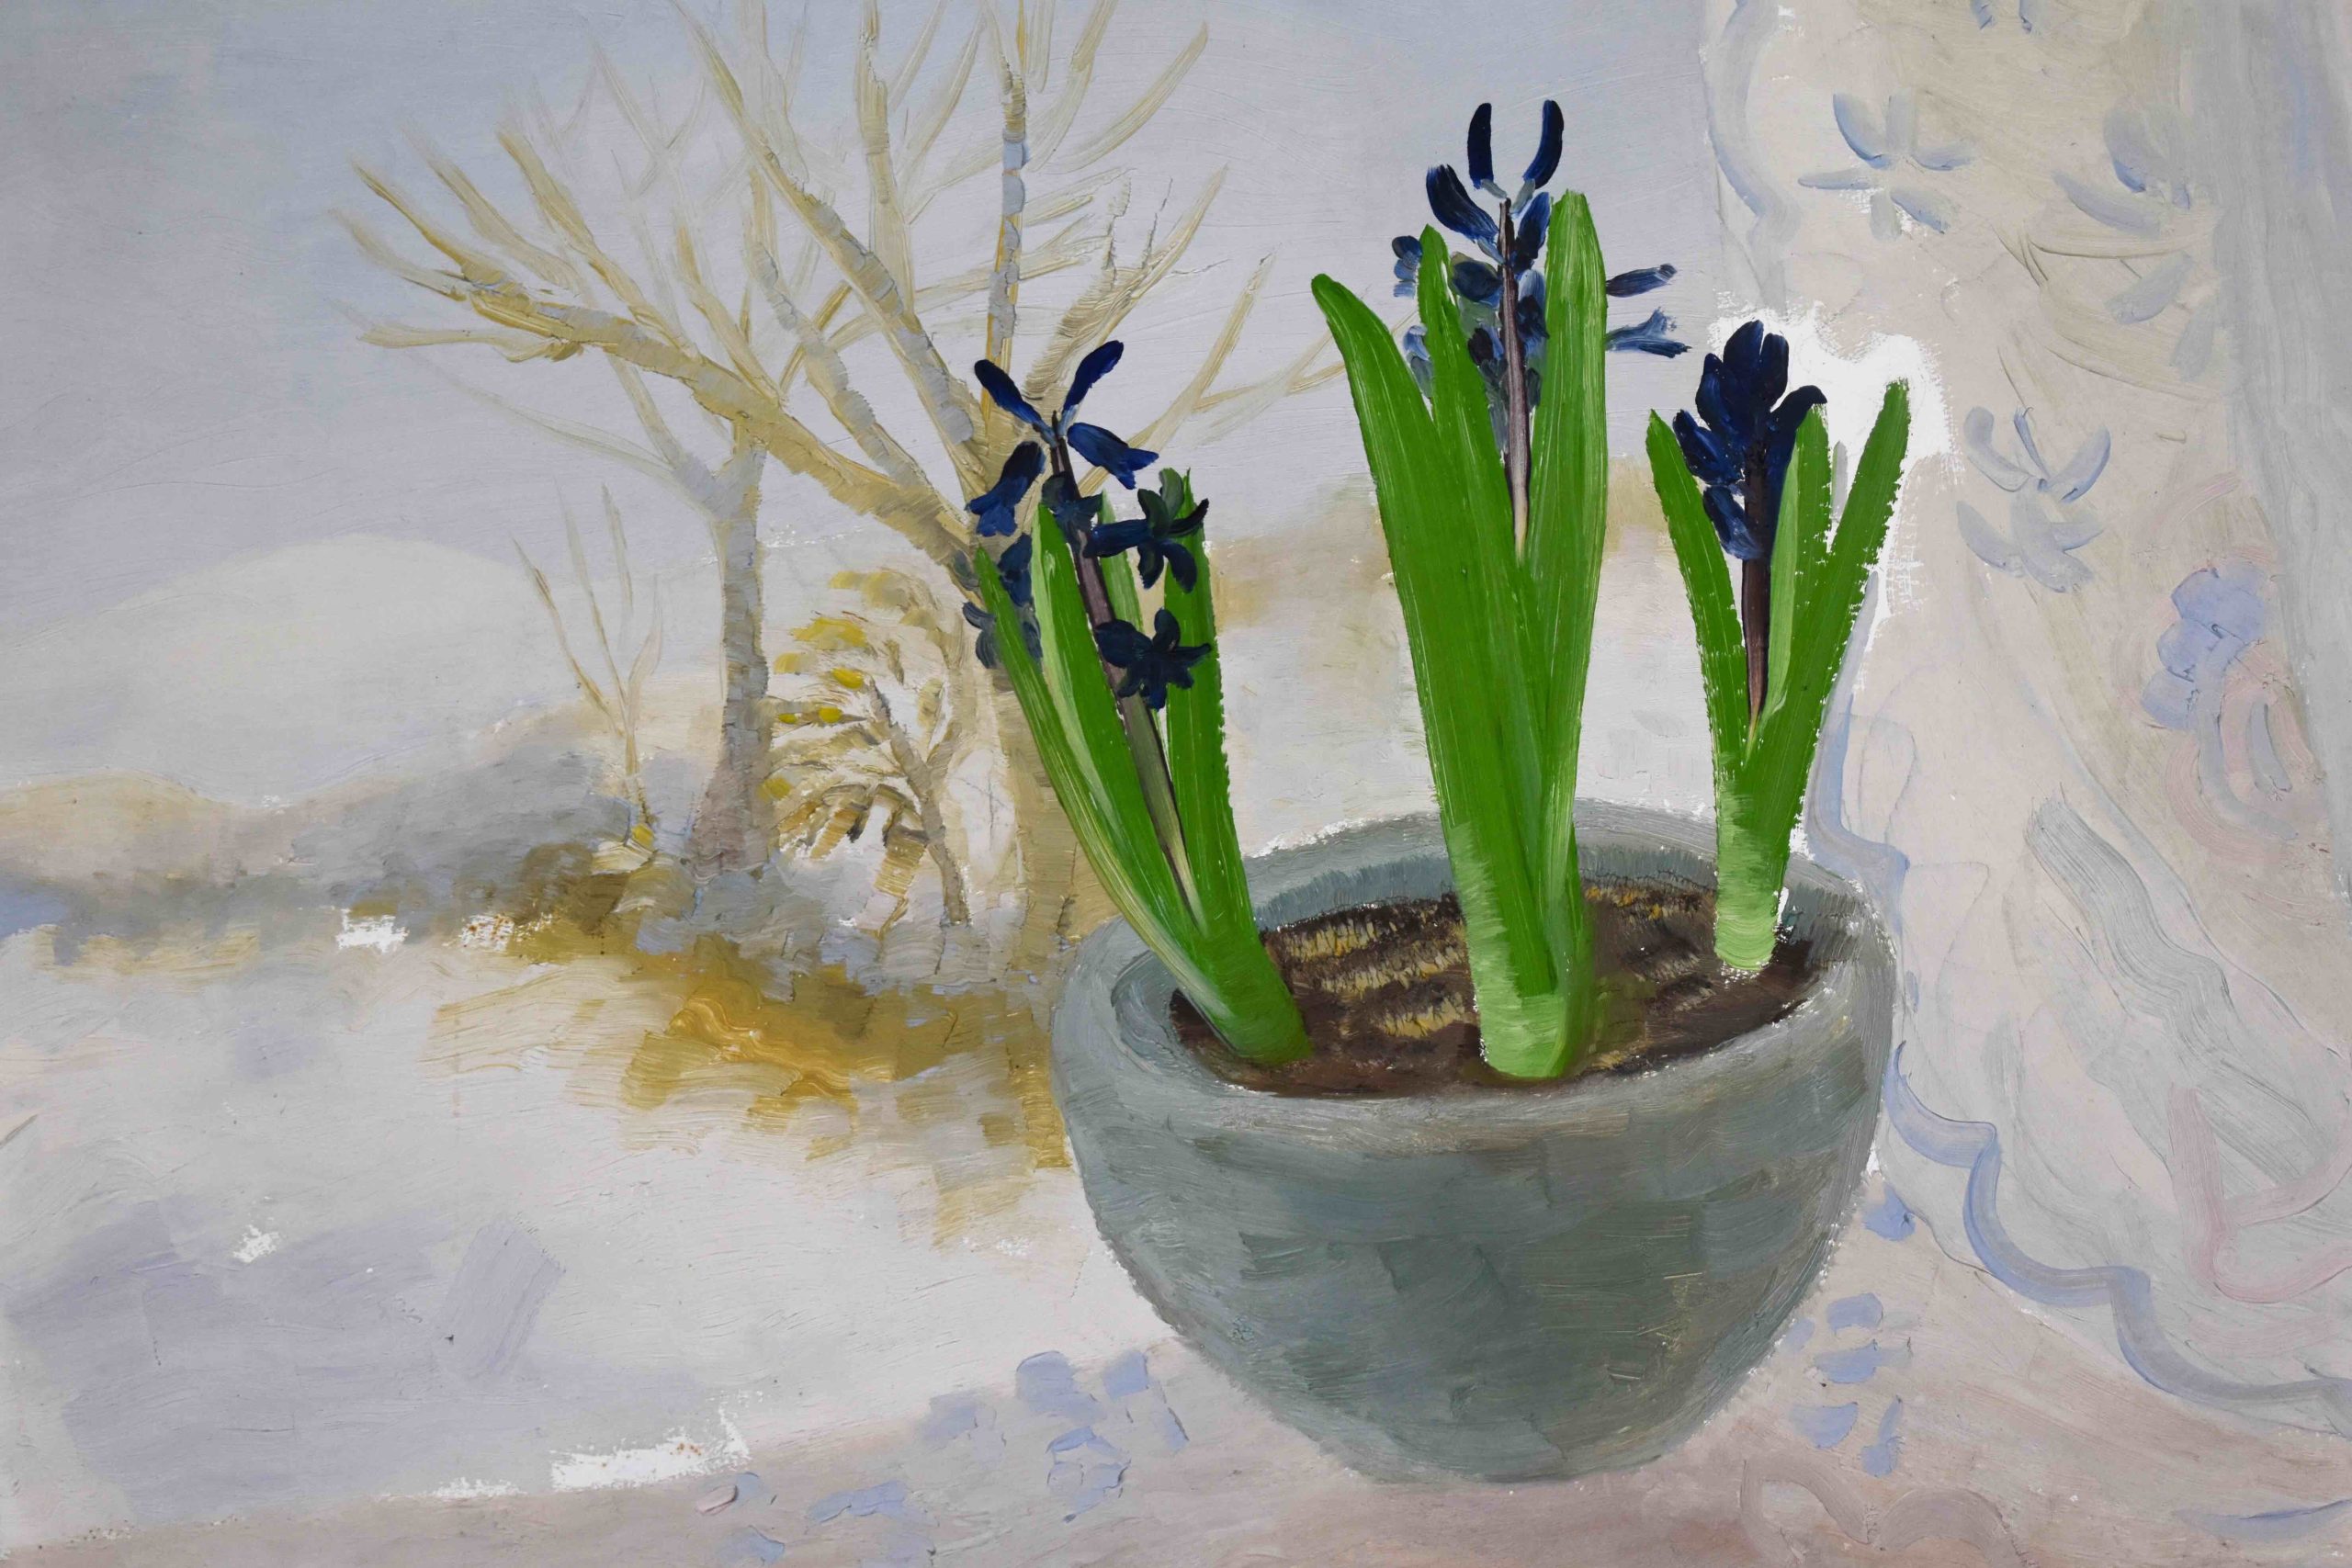 A painting of Blue Hyacinths In A Winter Landscape by Winifred Nicholson